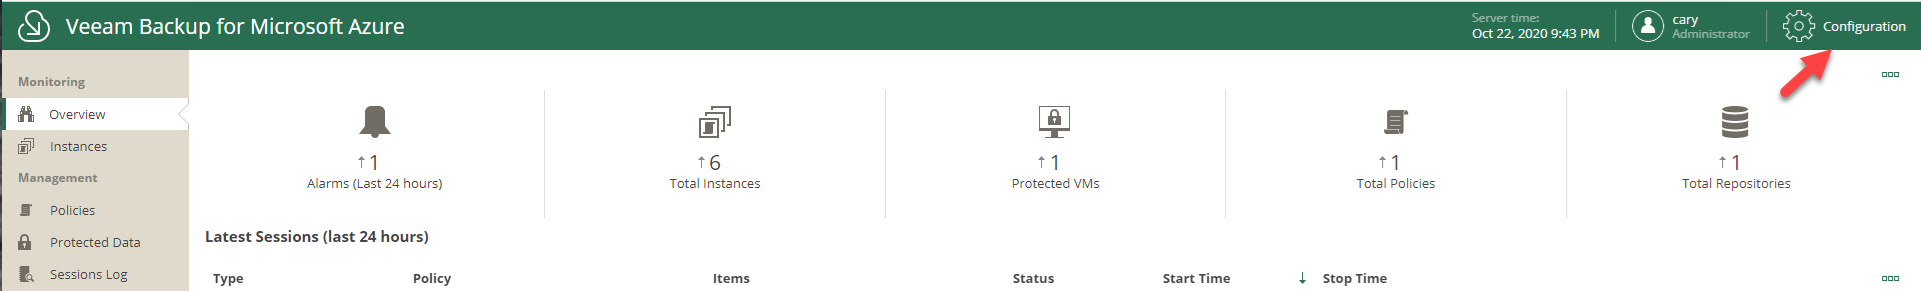 102220 2256 Howtoconfig2 - How to configure notification for #Veeam Backup for Microsoft #Azure with free #SendGrid account